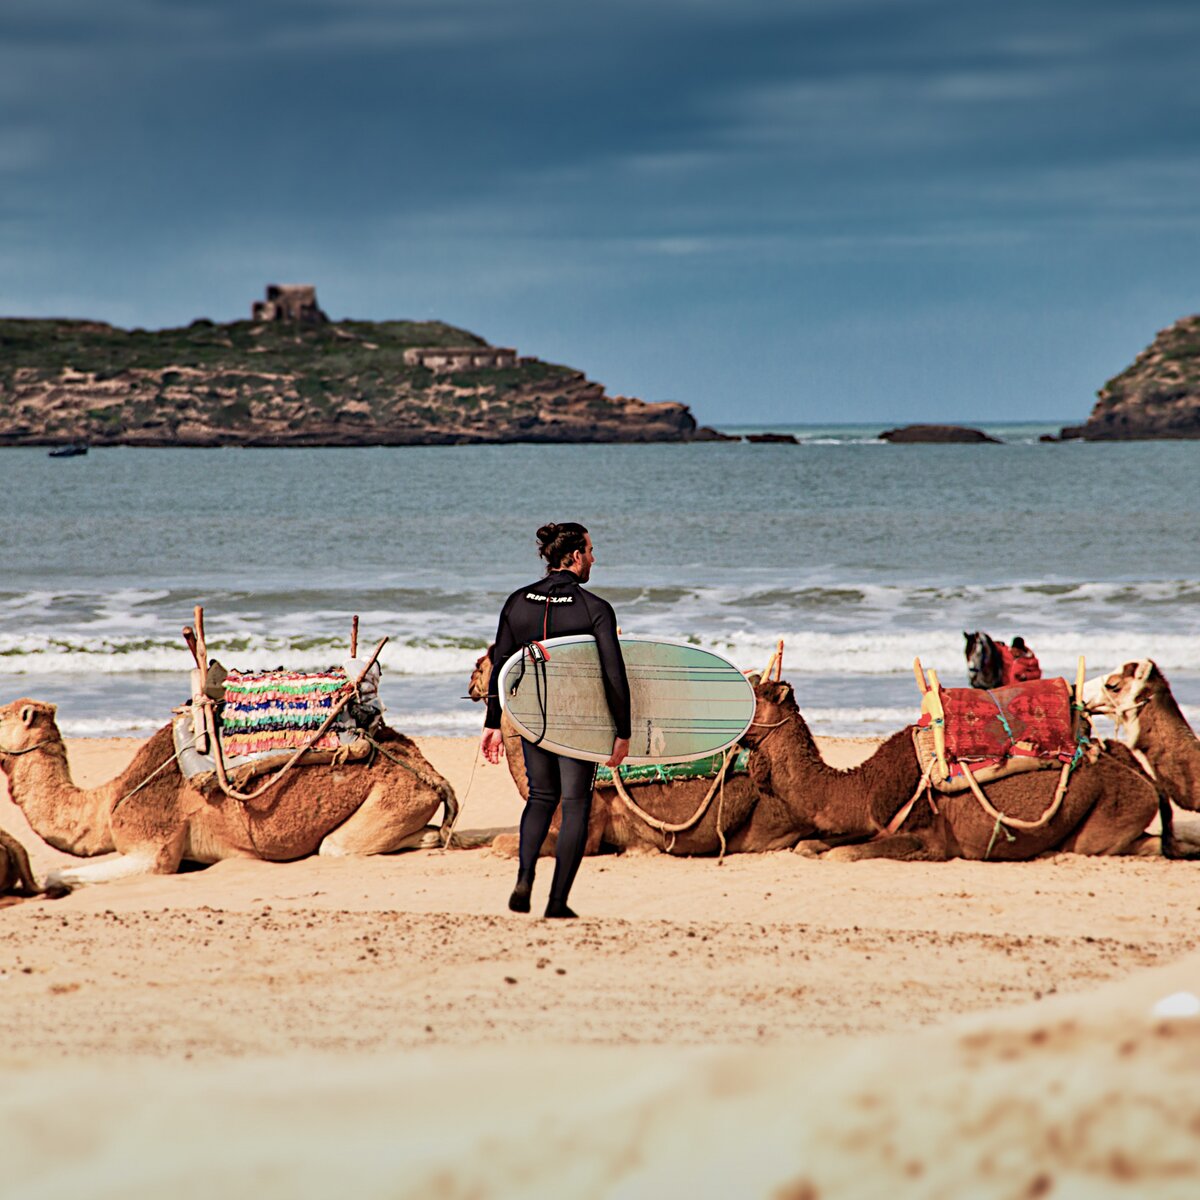 man walking on beach with camels